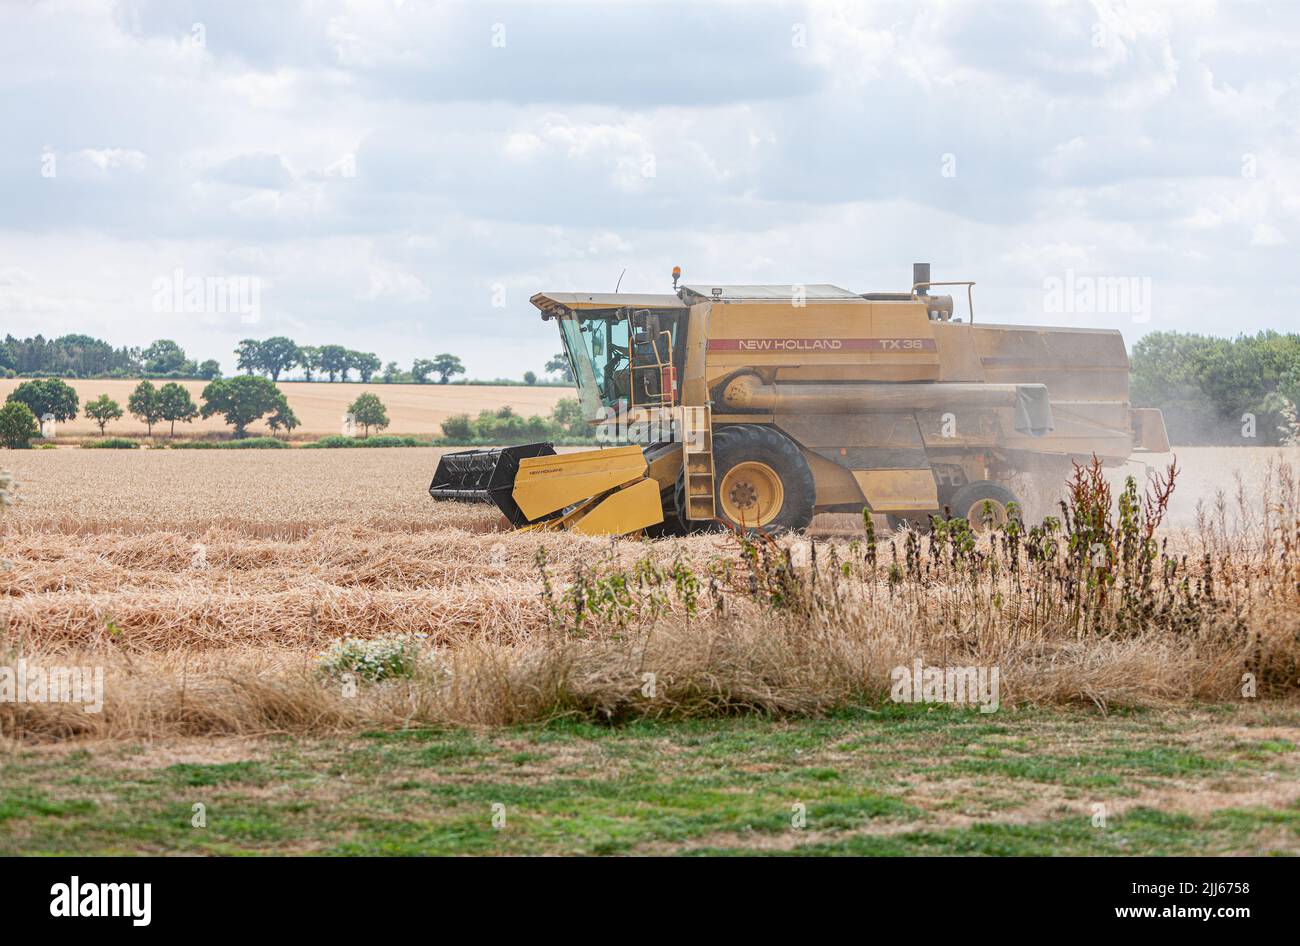 harvesting wheat in norfolk combine harvester new holland tx 36 Stock Photo